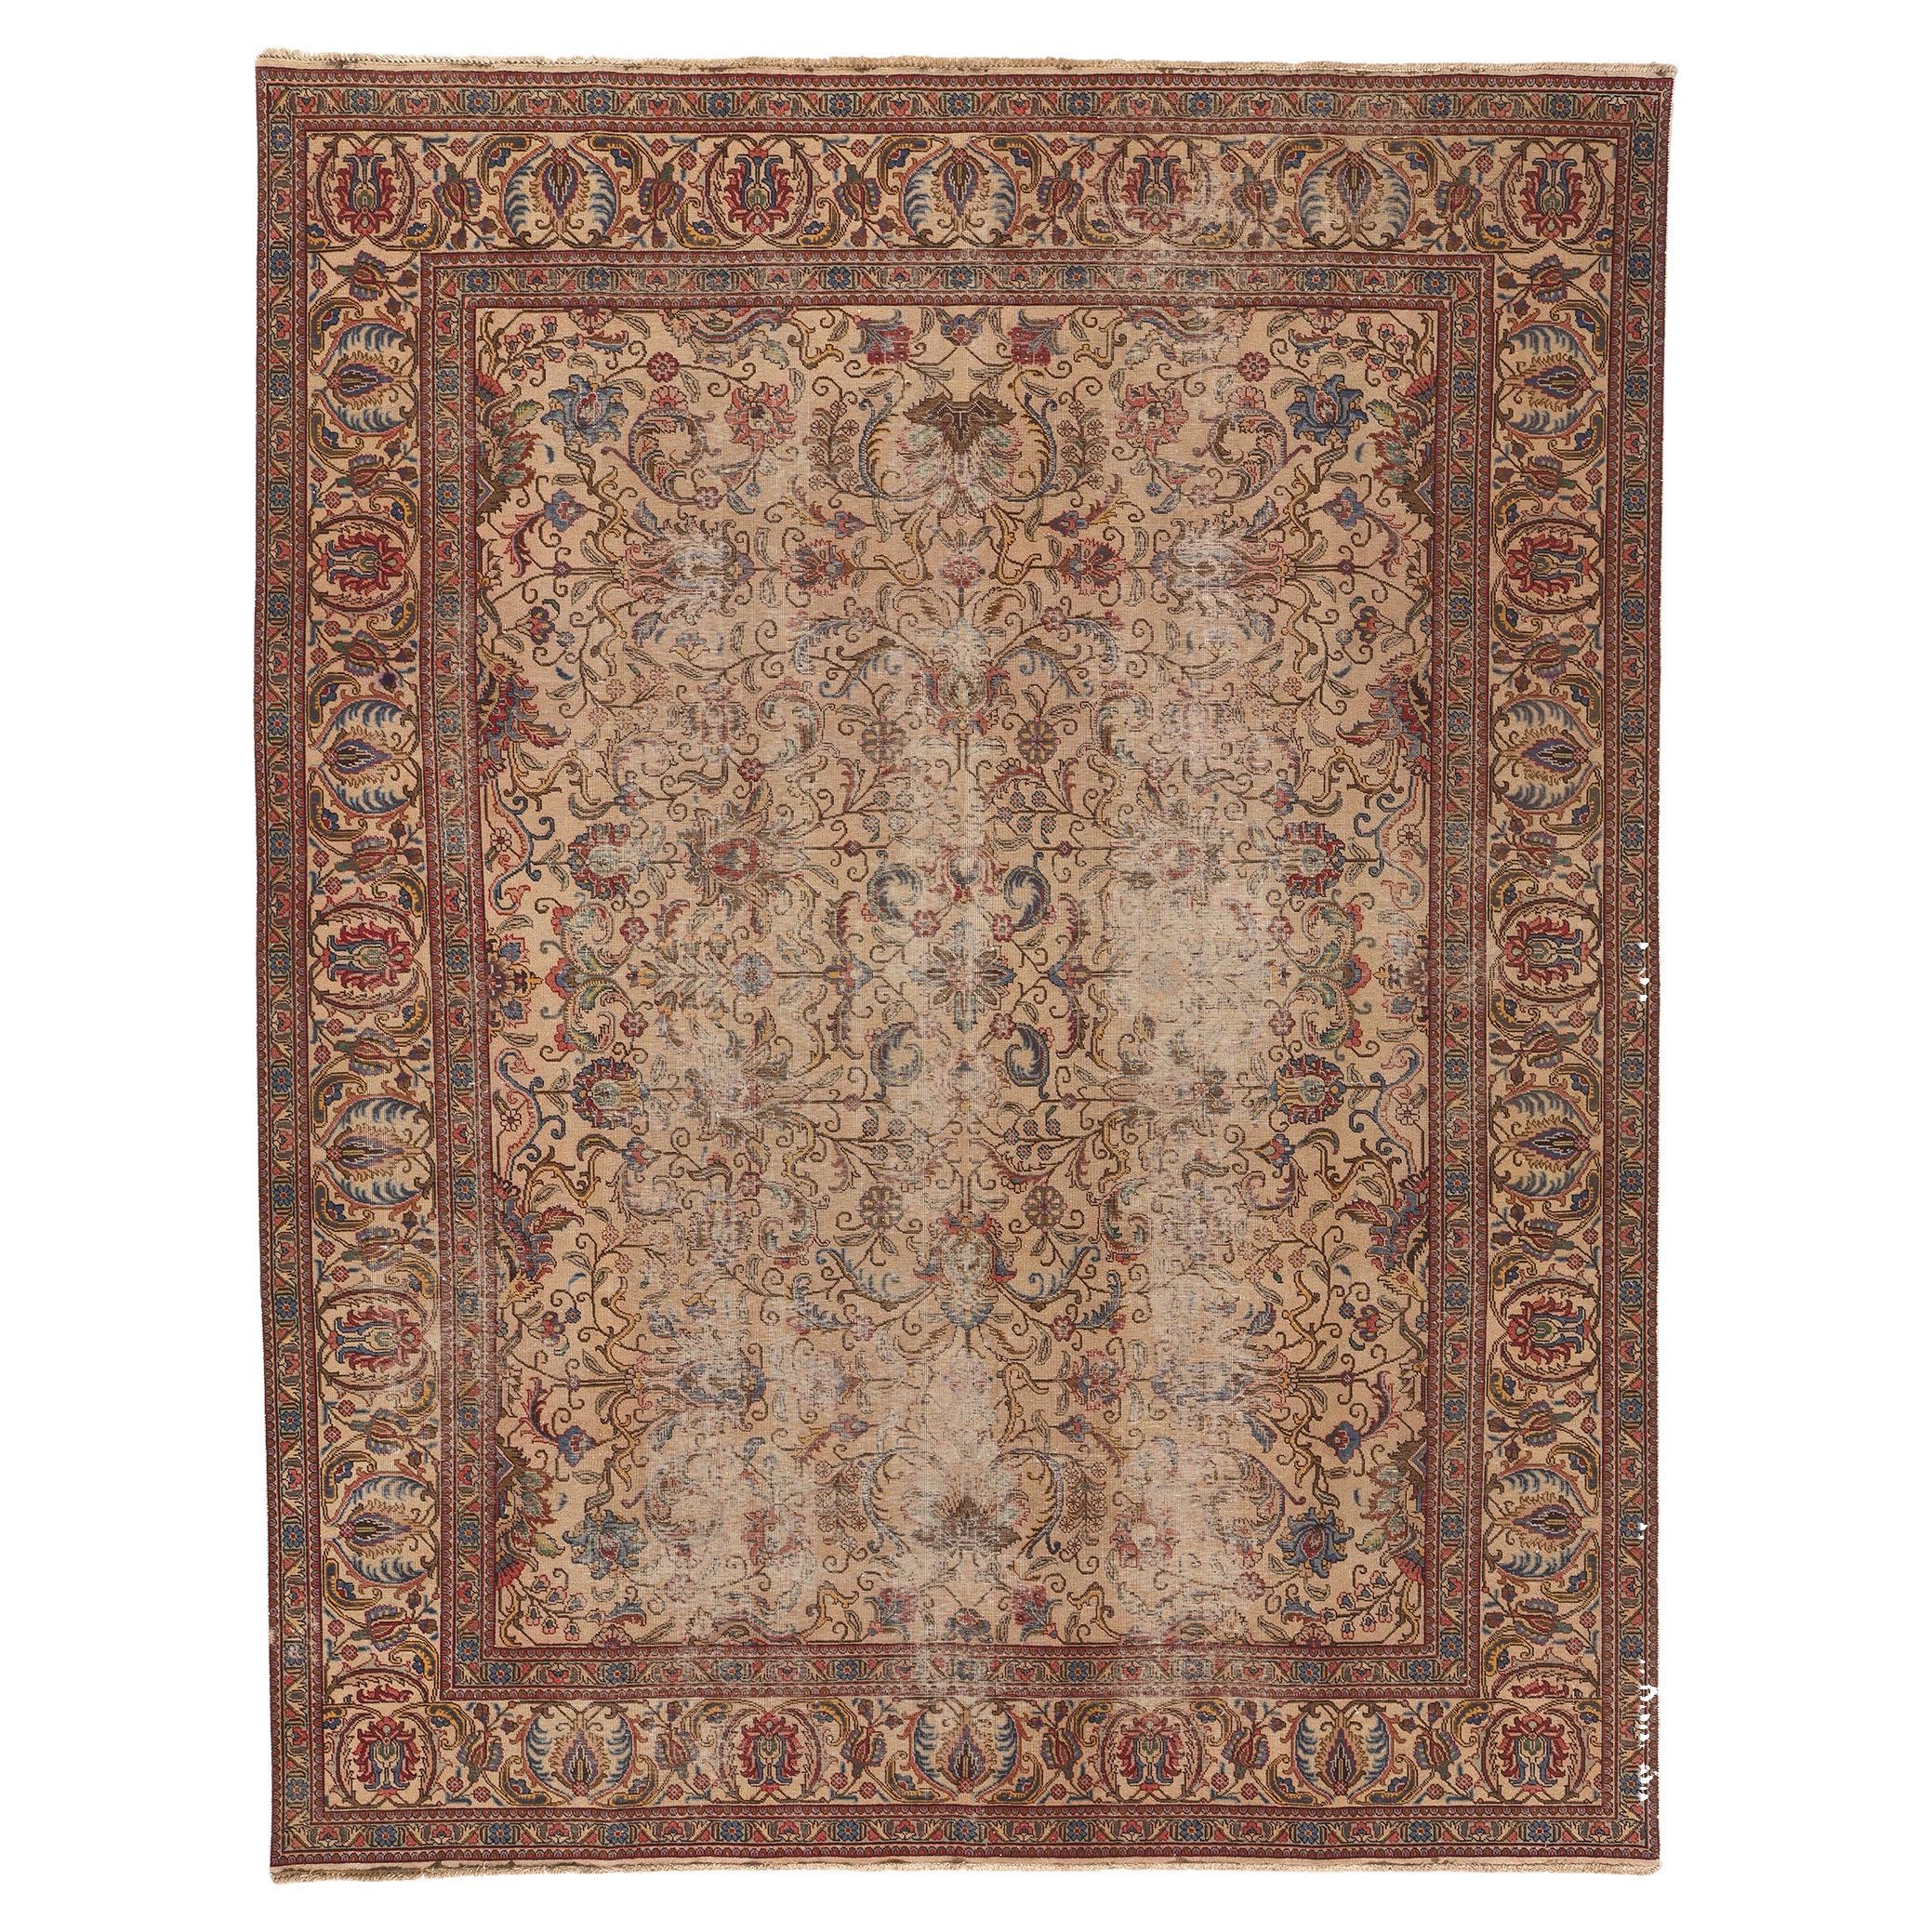 Antique-Worn Persian Tabriz Rug, Weathered Beauty Meets Rustic Sensibility For Sale